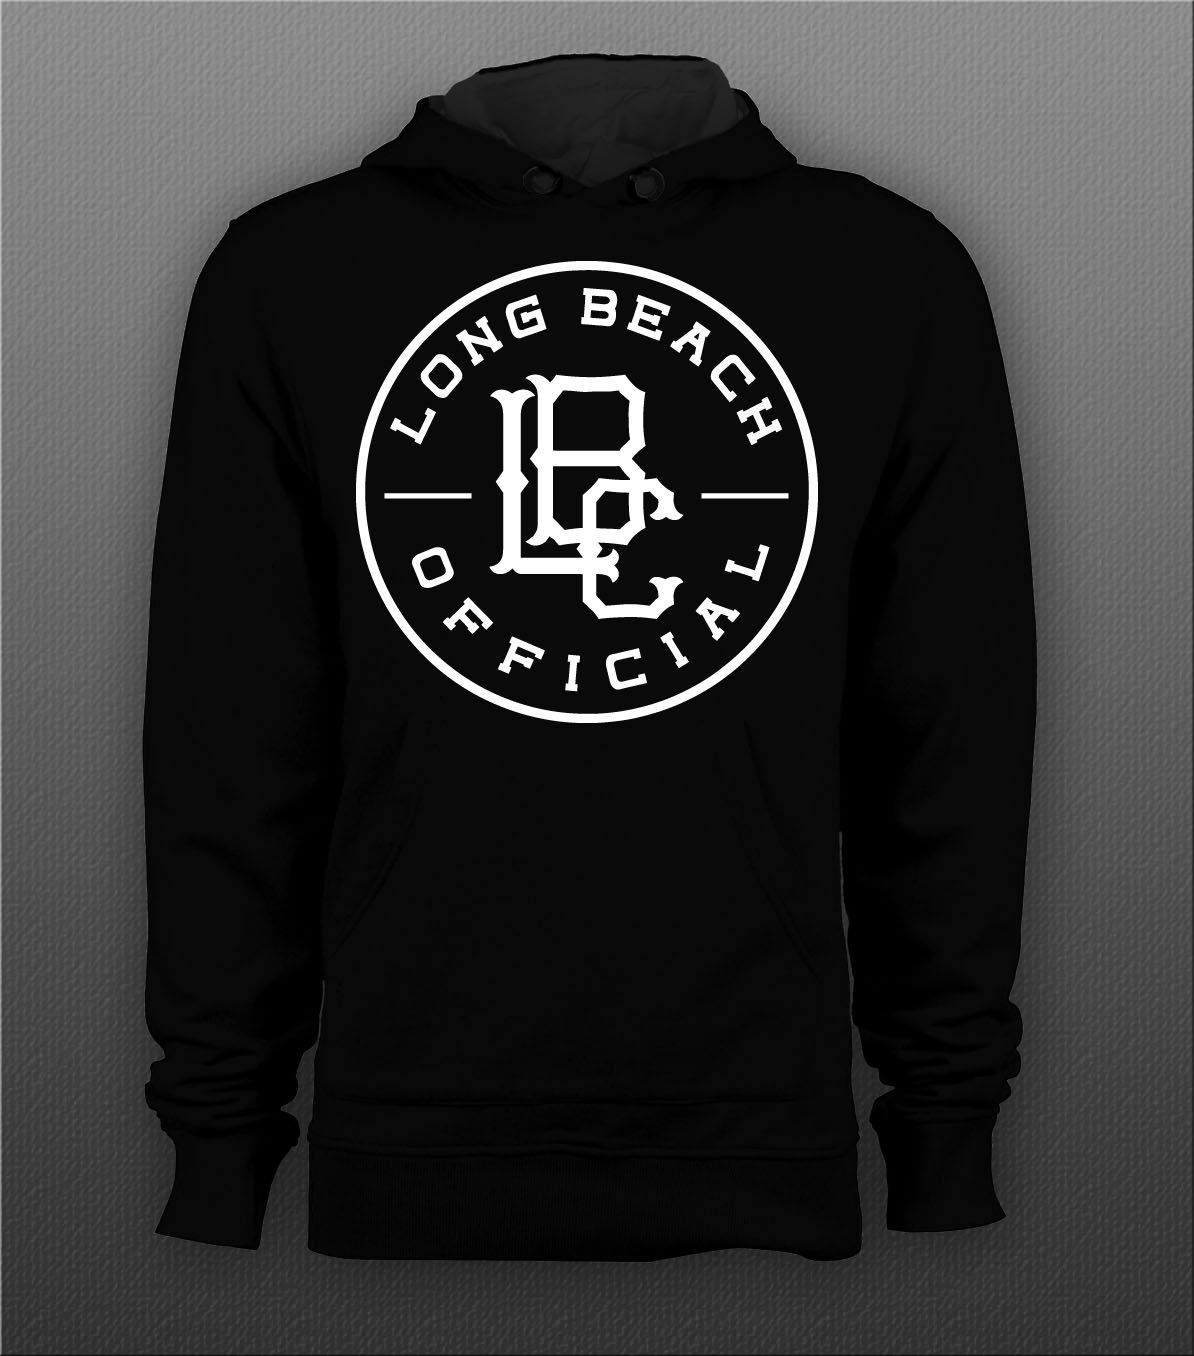 https://assets.bigcartel.com/product_images/146760532/long_beach_official_hoodie.jpg?auto=format&fit=max&w=2000